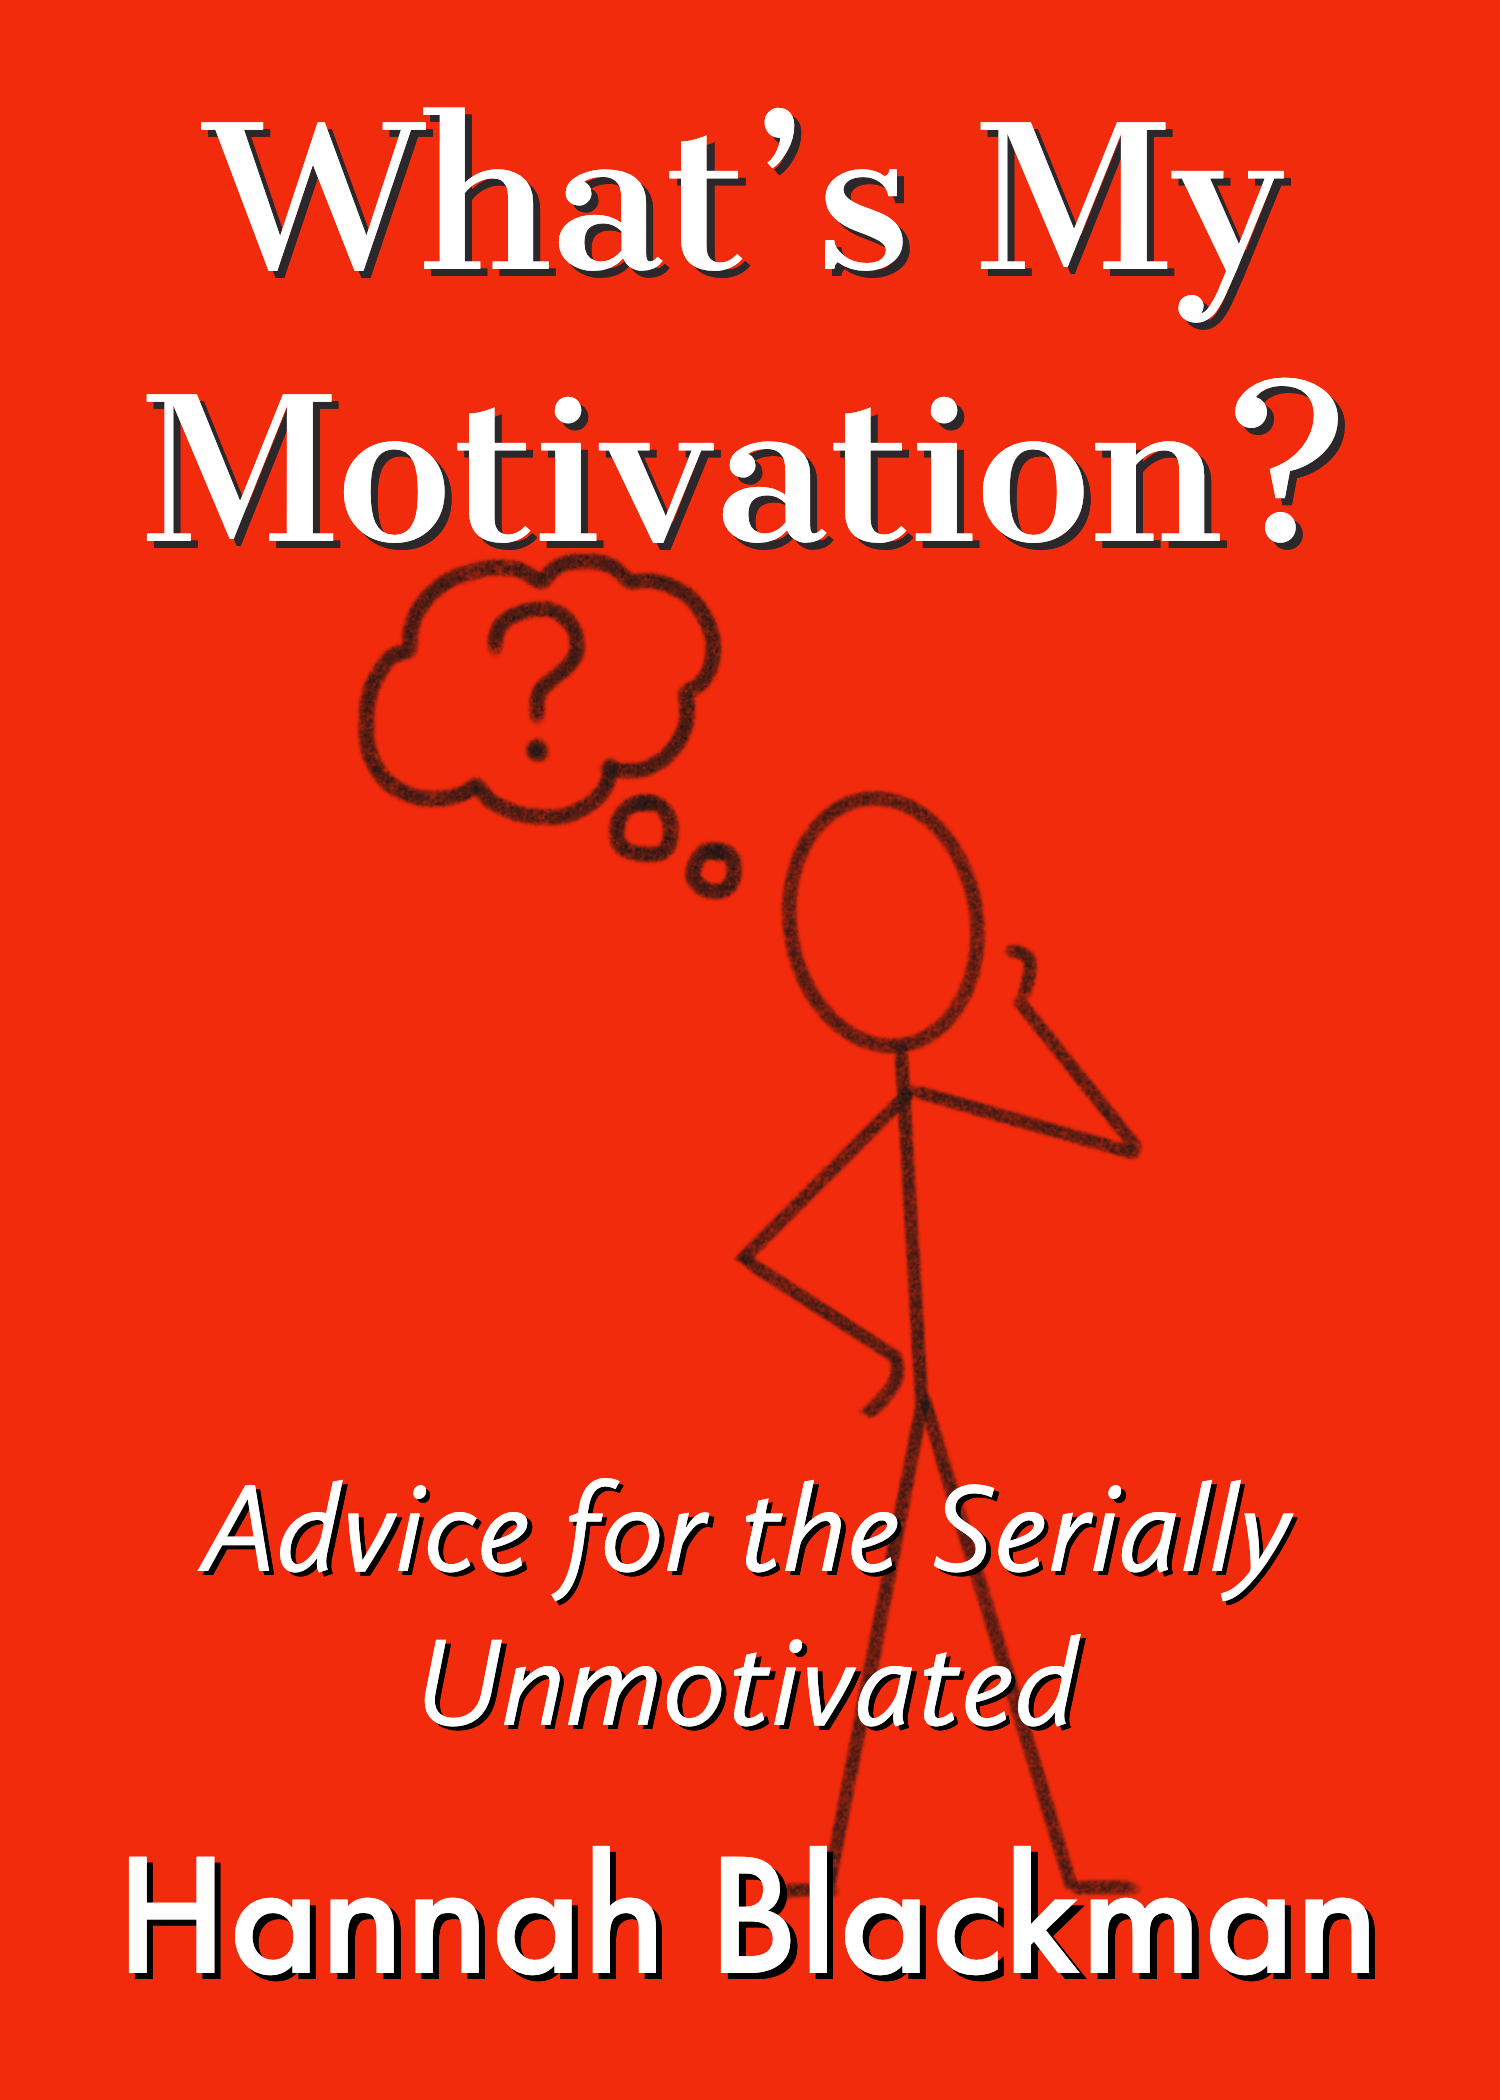 FREE: What’s My Motivation?: Advice for the Serially Unmotivated by Hannah Blackman